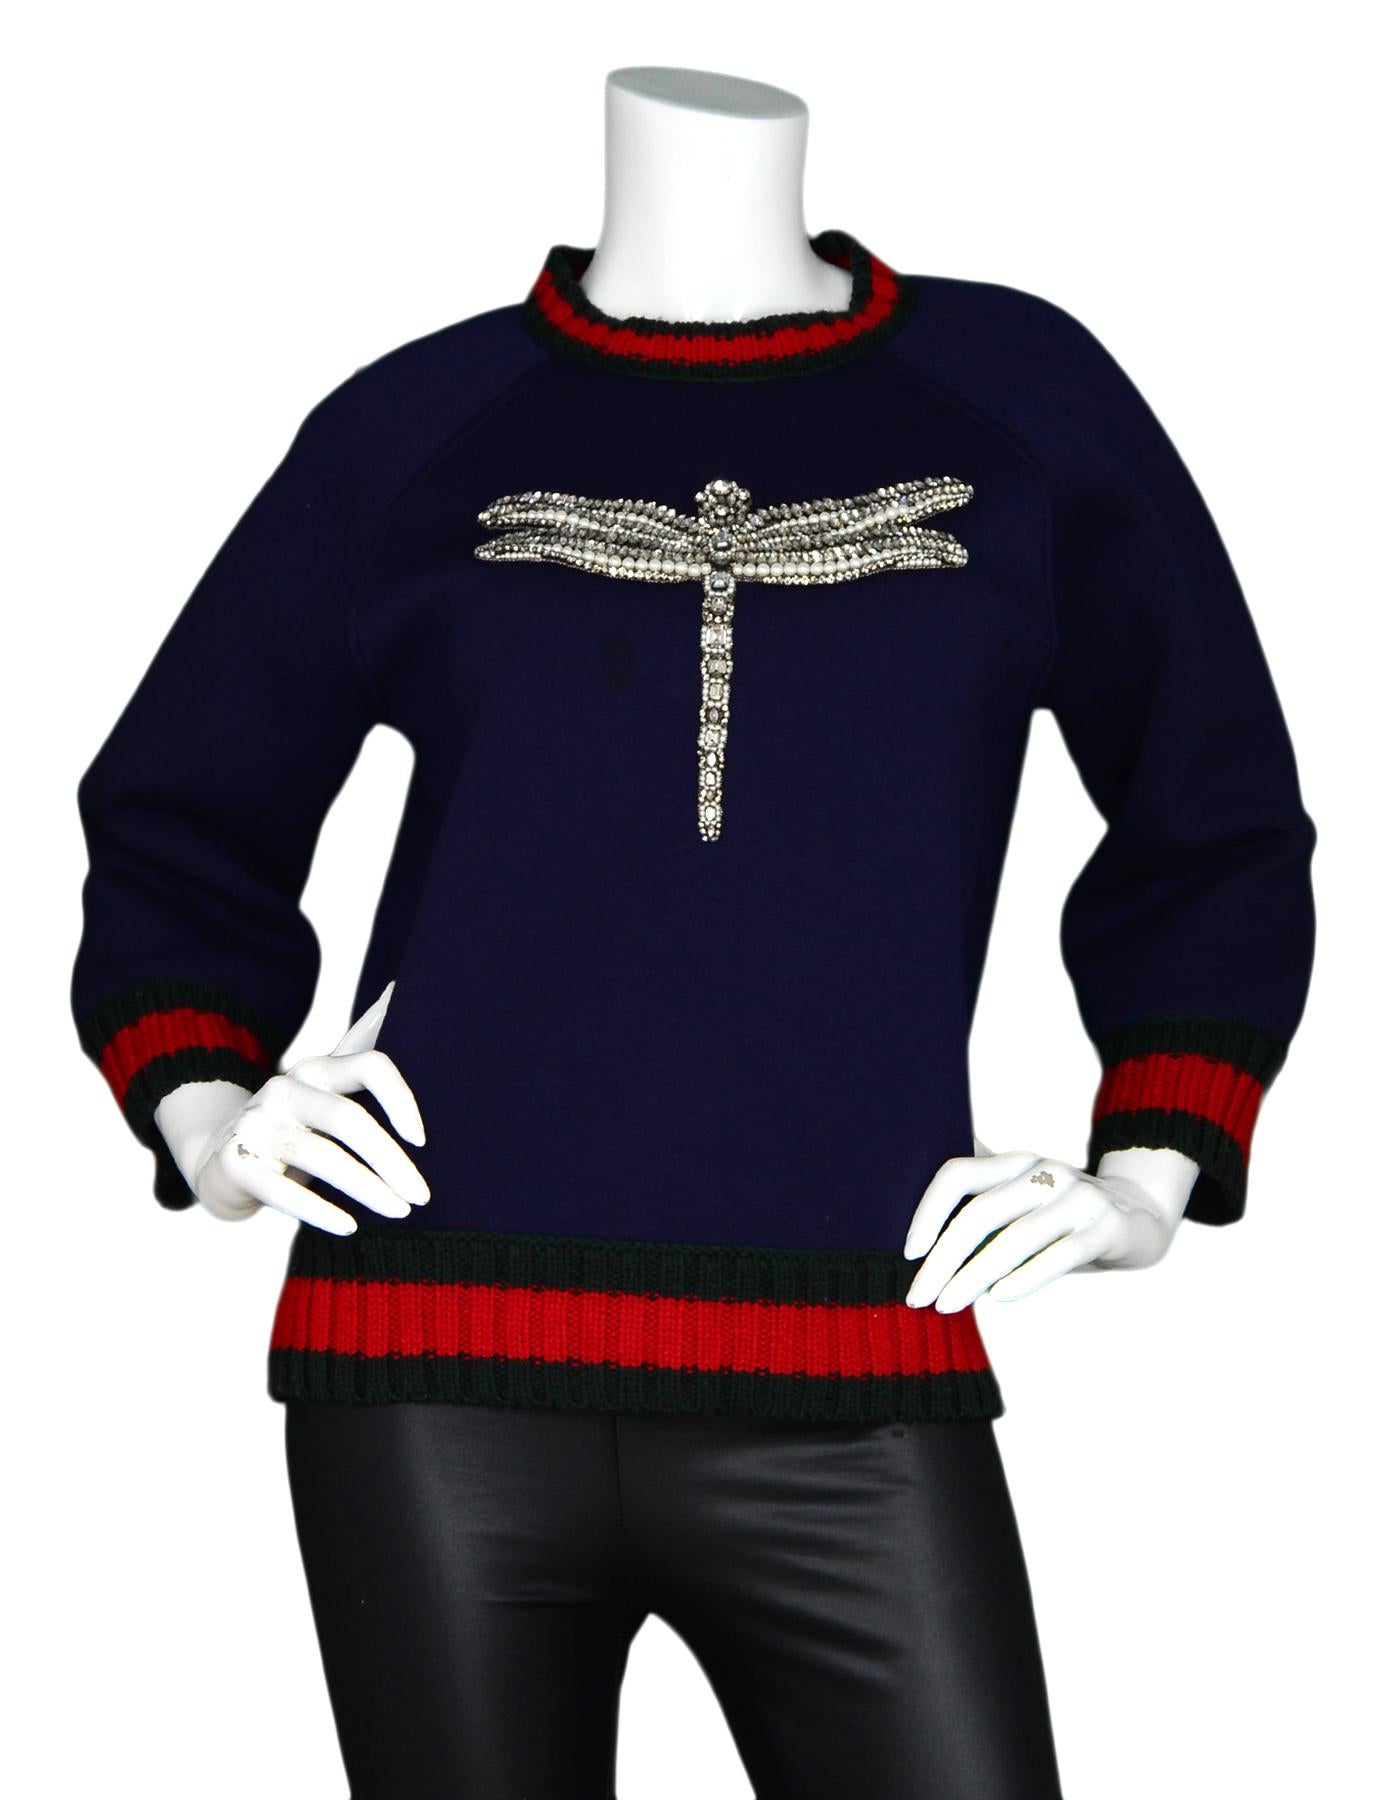 Gucci Navy Crystal Dragonfly Sweatshirt Sweater W/ Knit Web Trim Sz S

Made In: Italy   
Color: Navy, red, green
Materials: 100% rayon, trim- 100% wool, embroidery- 100% silk
Opening/Closure: Pull over
Overall Condition: Good pre-owned condition